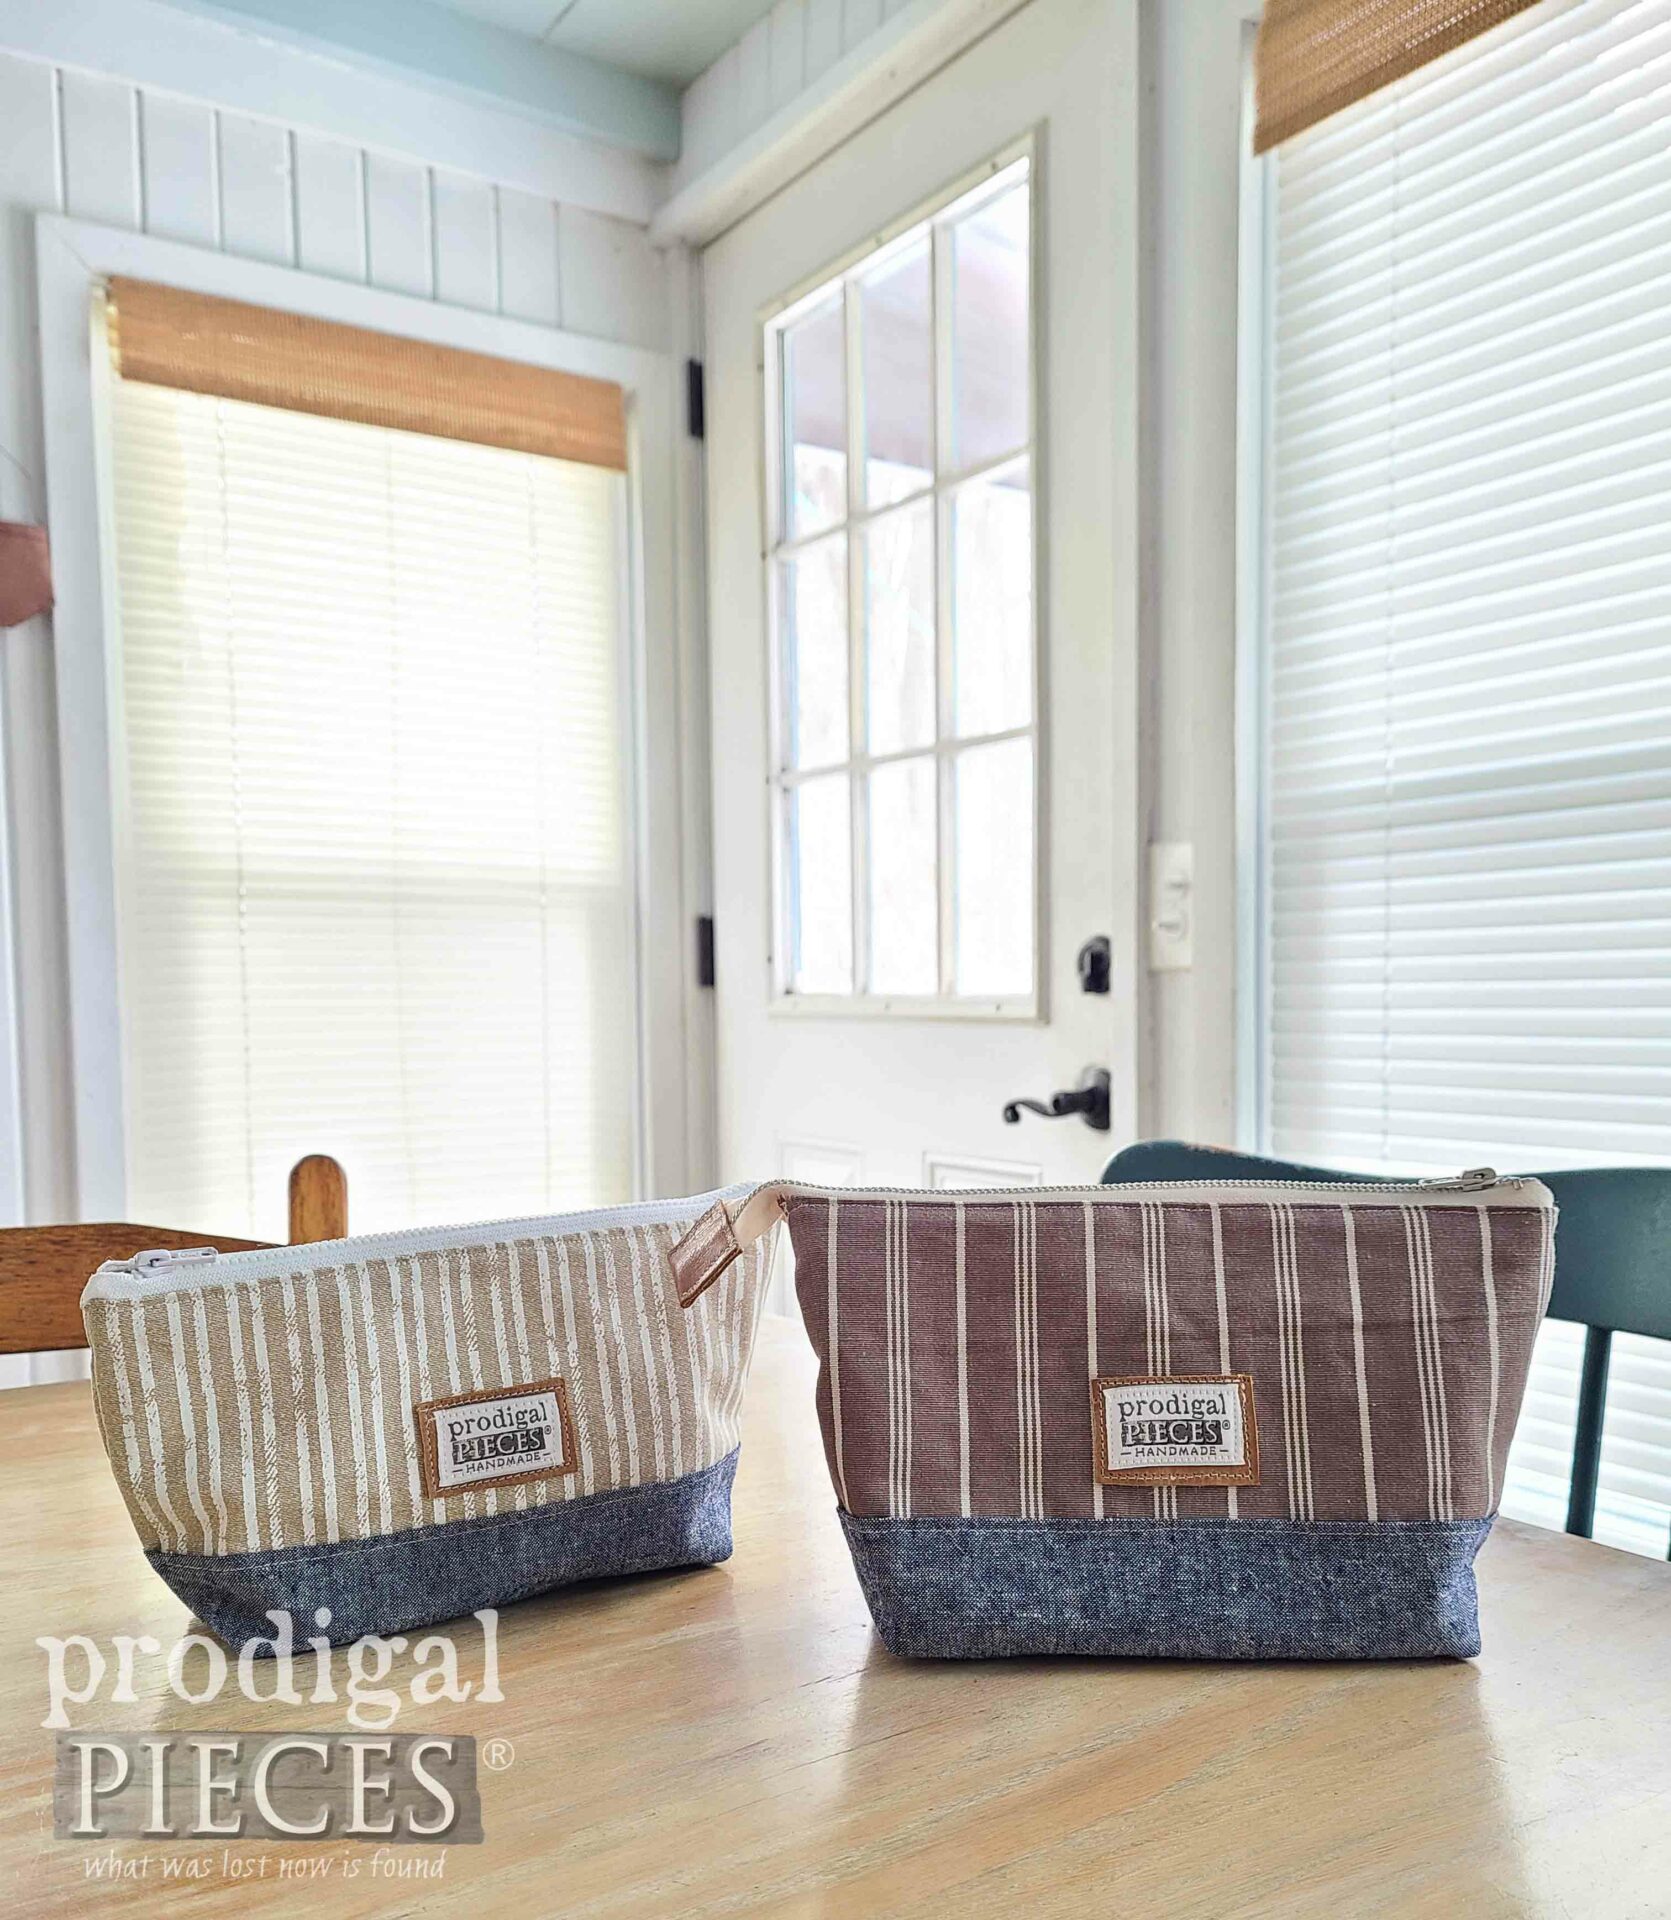 DIY Freestanding Pouch Giveaway by Larissa of Prodigal Pieces | prodigalpieces.com #prodigalpieces